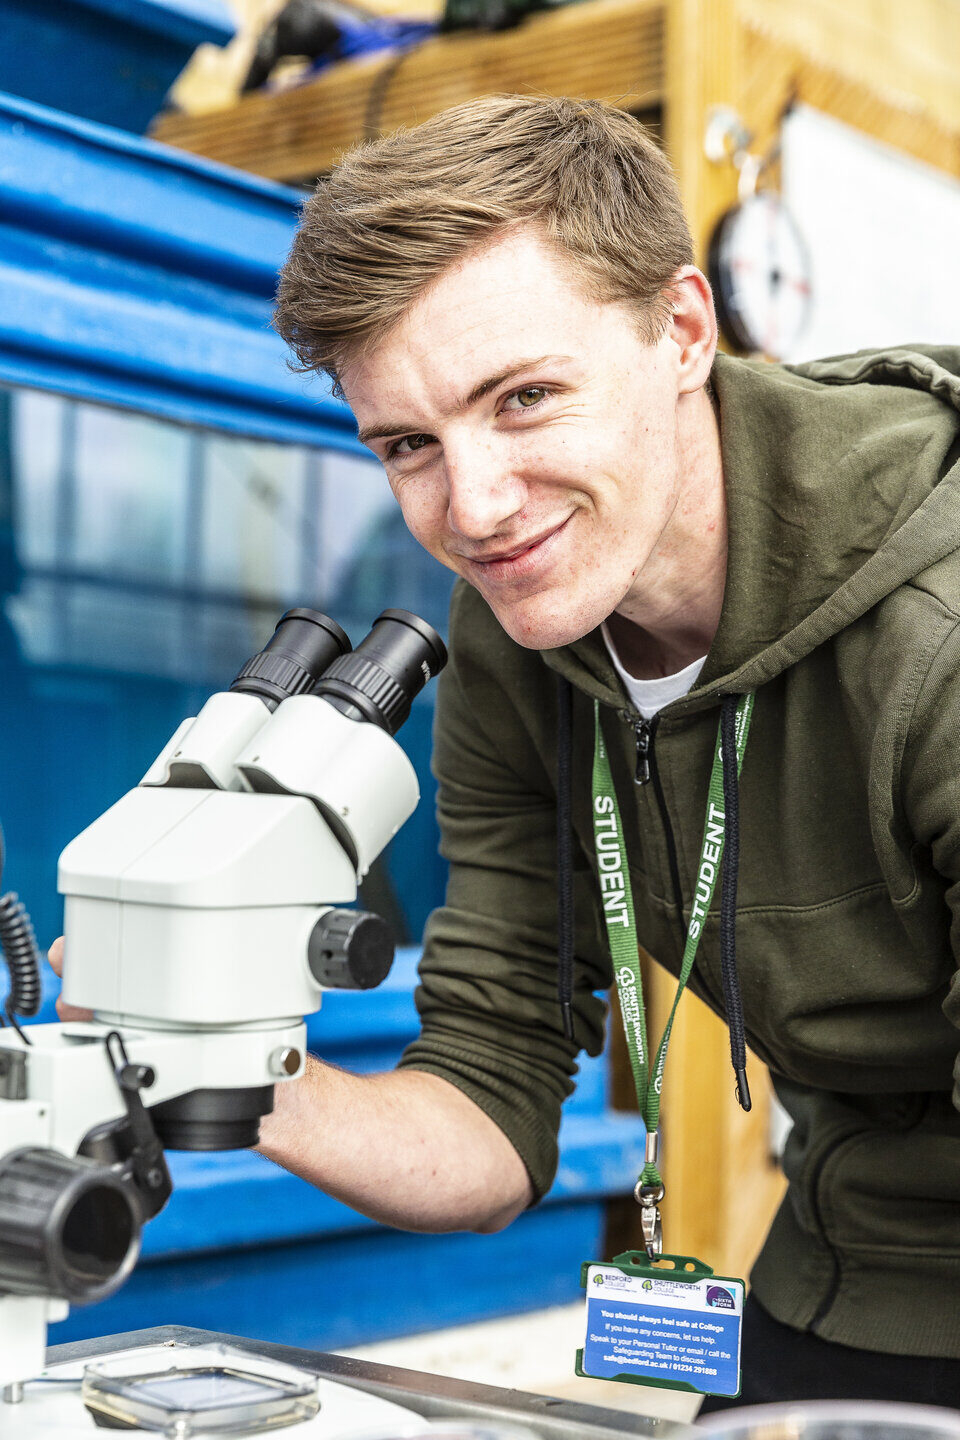 Fish Management student with microscope Shuttleworth College